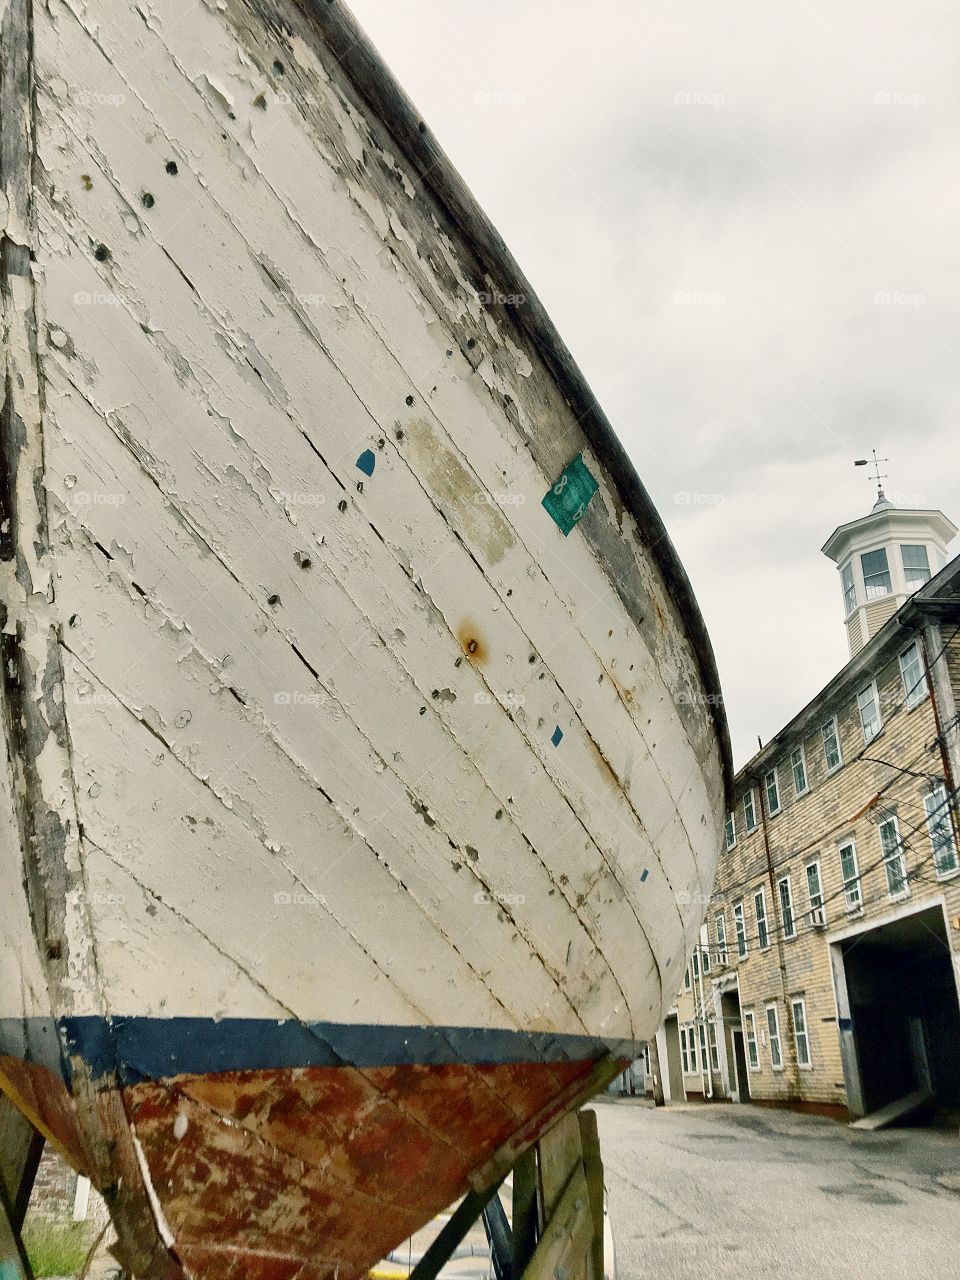 An old boat outside of an old downtown building